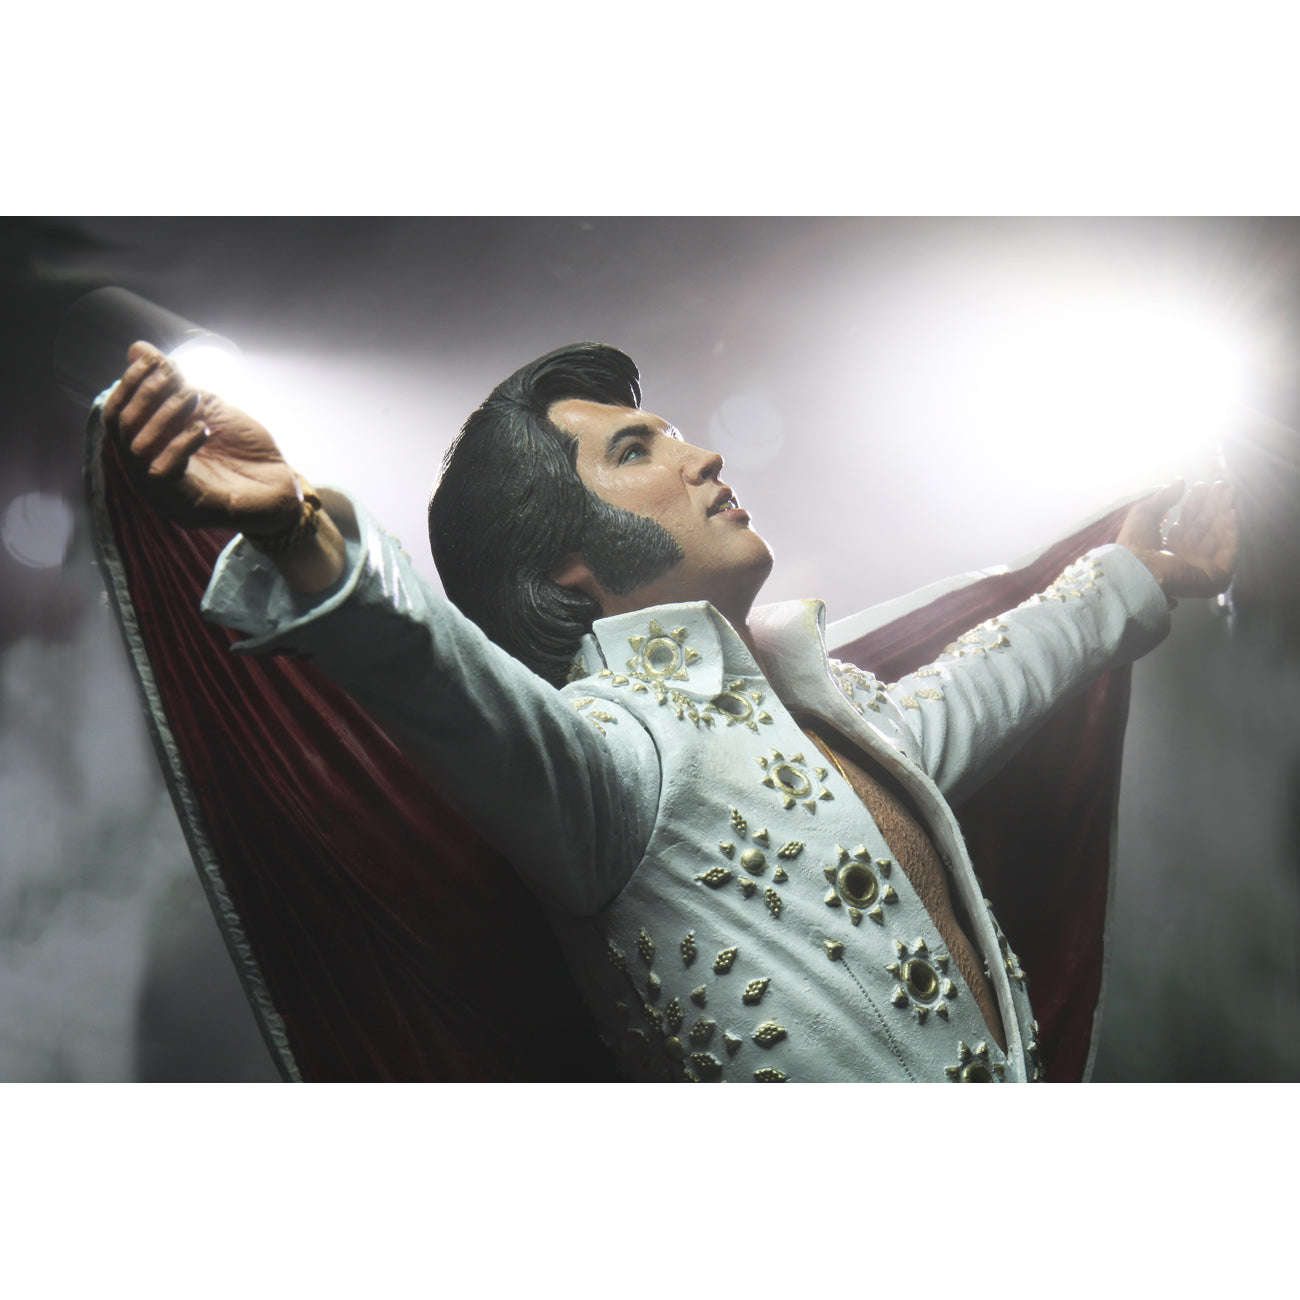 Elvis Presley: Live in ’72 7” Scale Collectible Action Figure